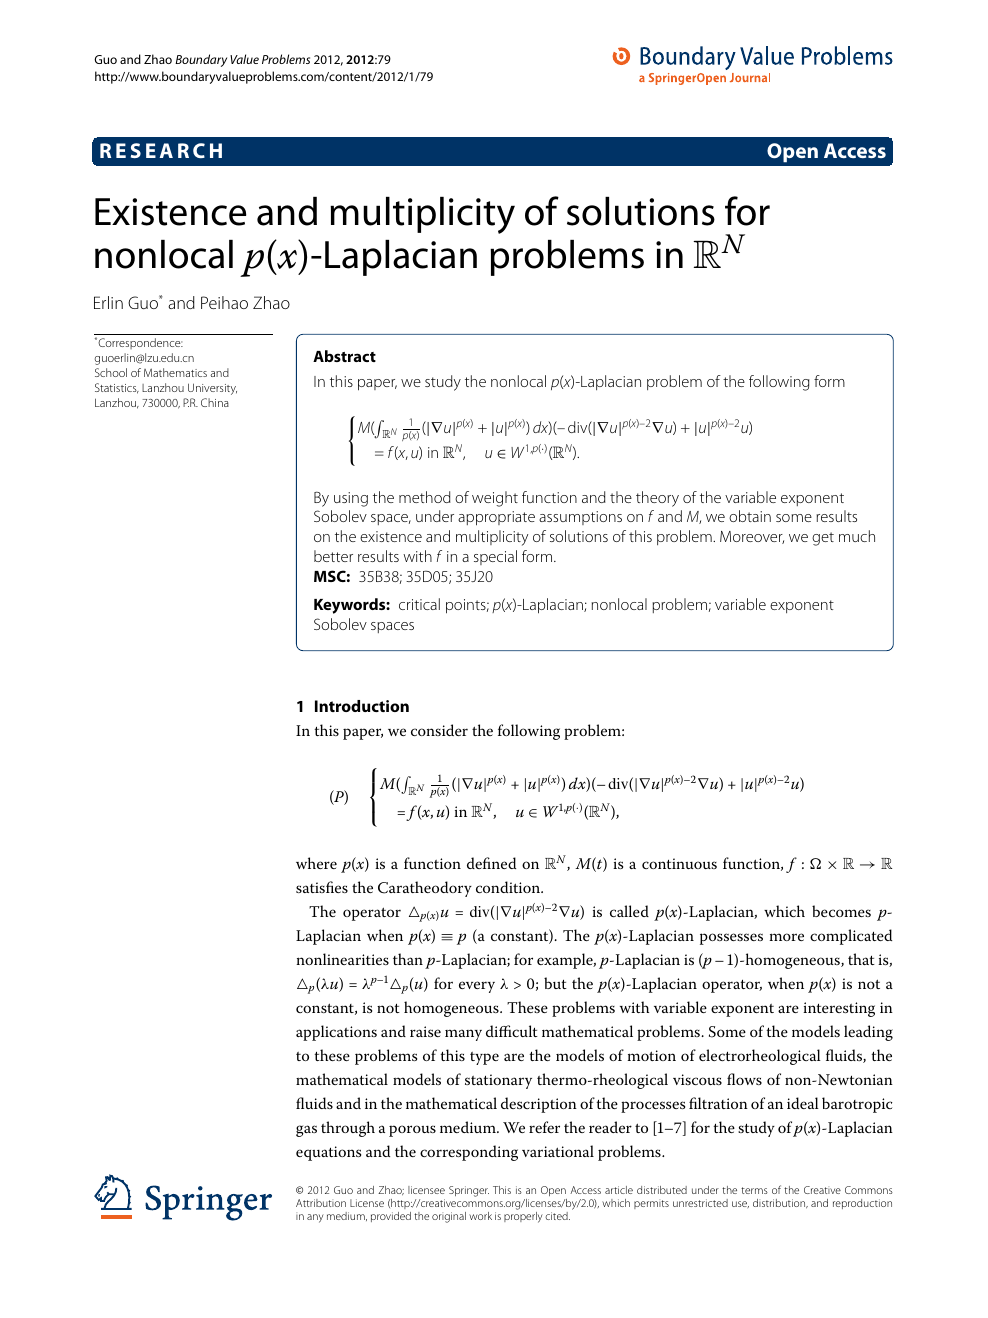 Existence And Multiplicity Of Solutions For Nonlocal P X Laplacian Problems In Rn Topic Of Research Paper In Mathematics Download Scholarly Article Pdf And Read For Free On Cyberleninka Open Science Hub